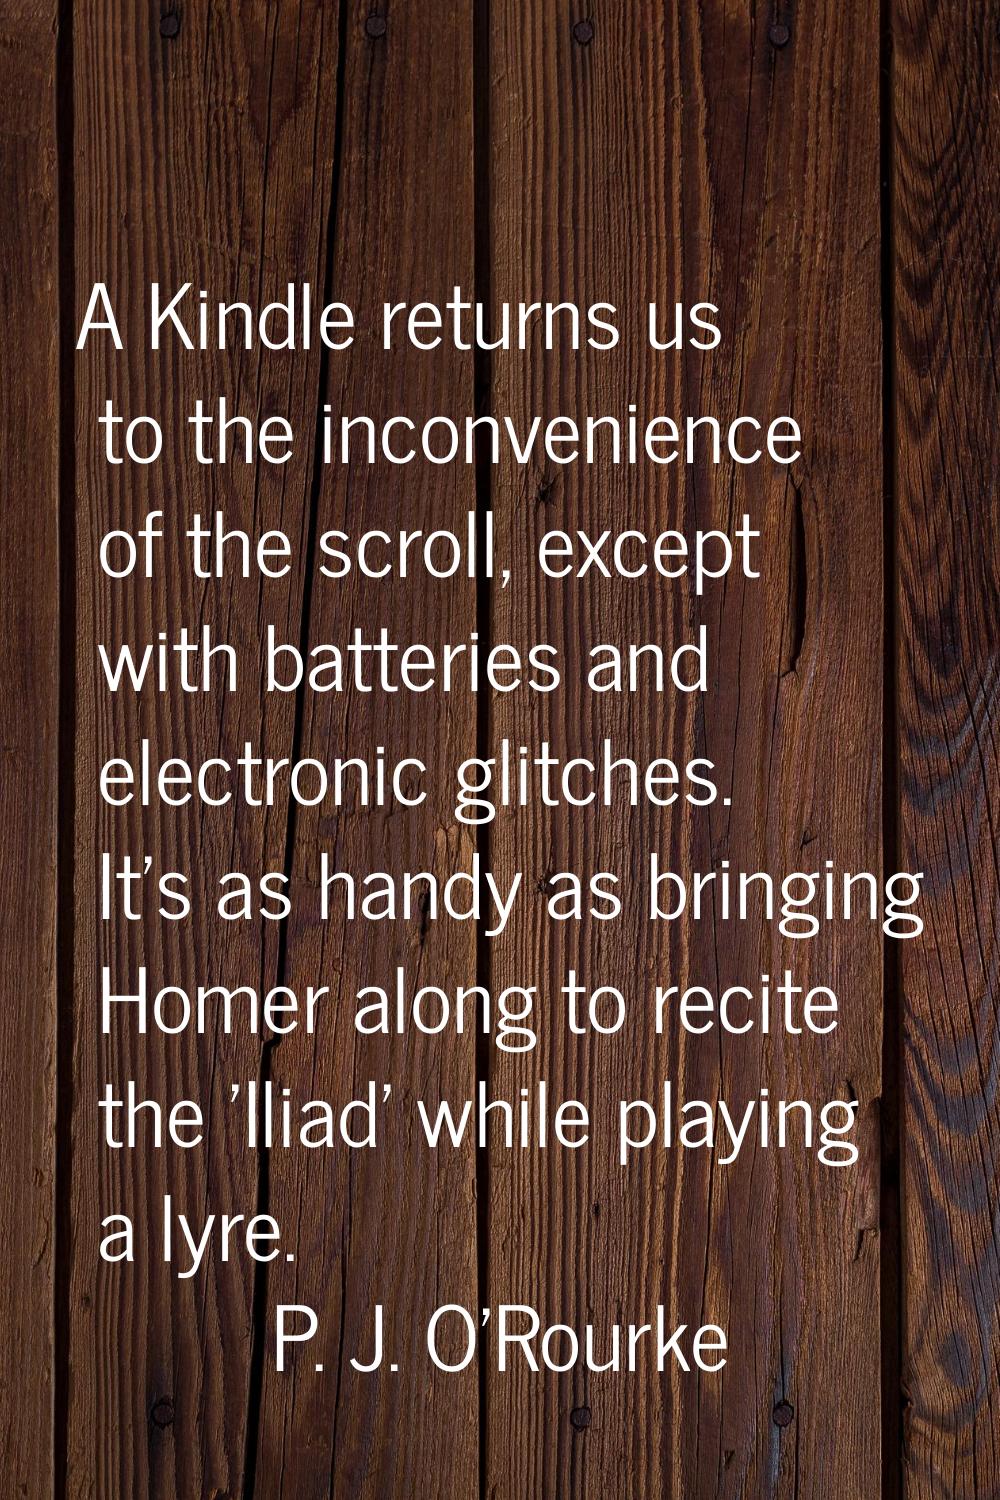 A Kindle returns us to the inconvenience of the scroll, except with batteries and electronic glitch